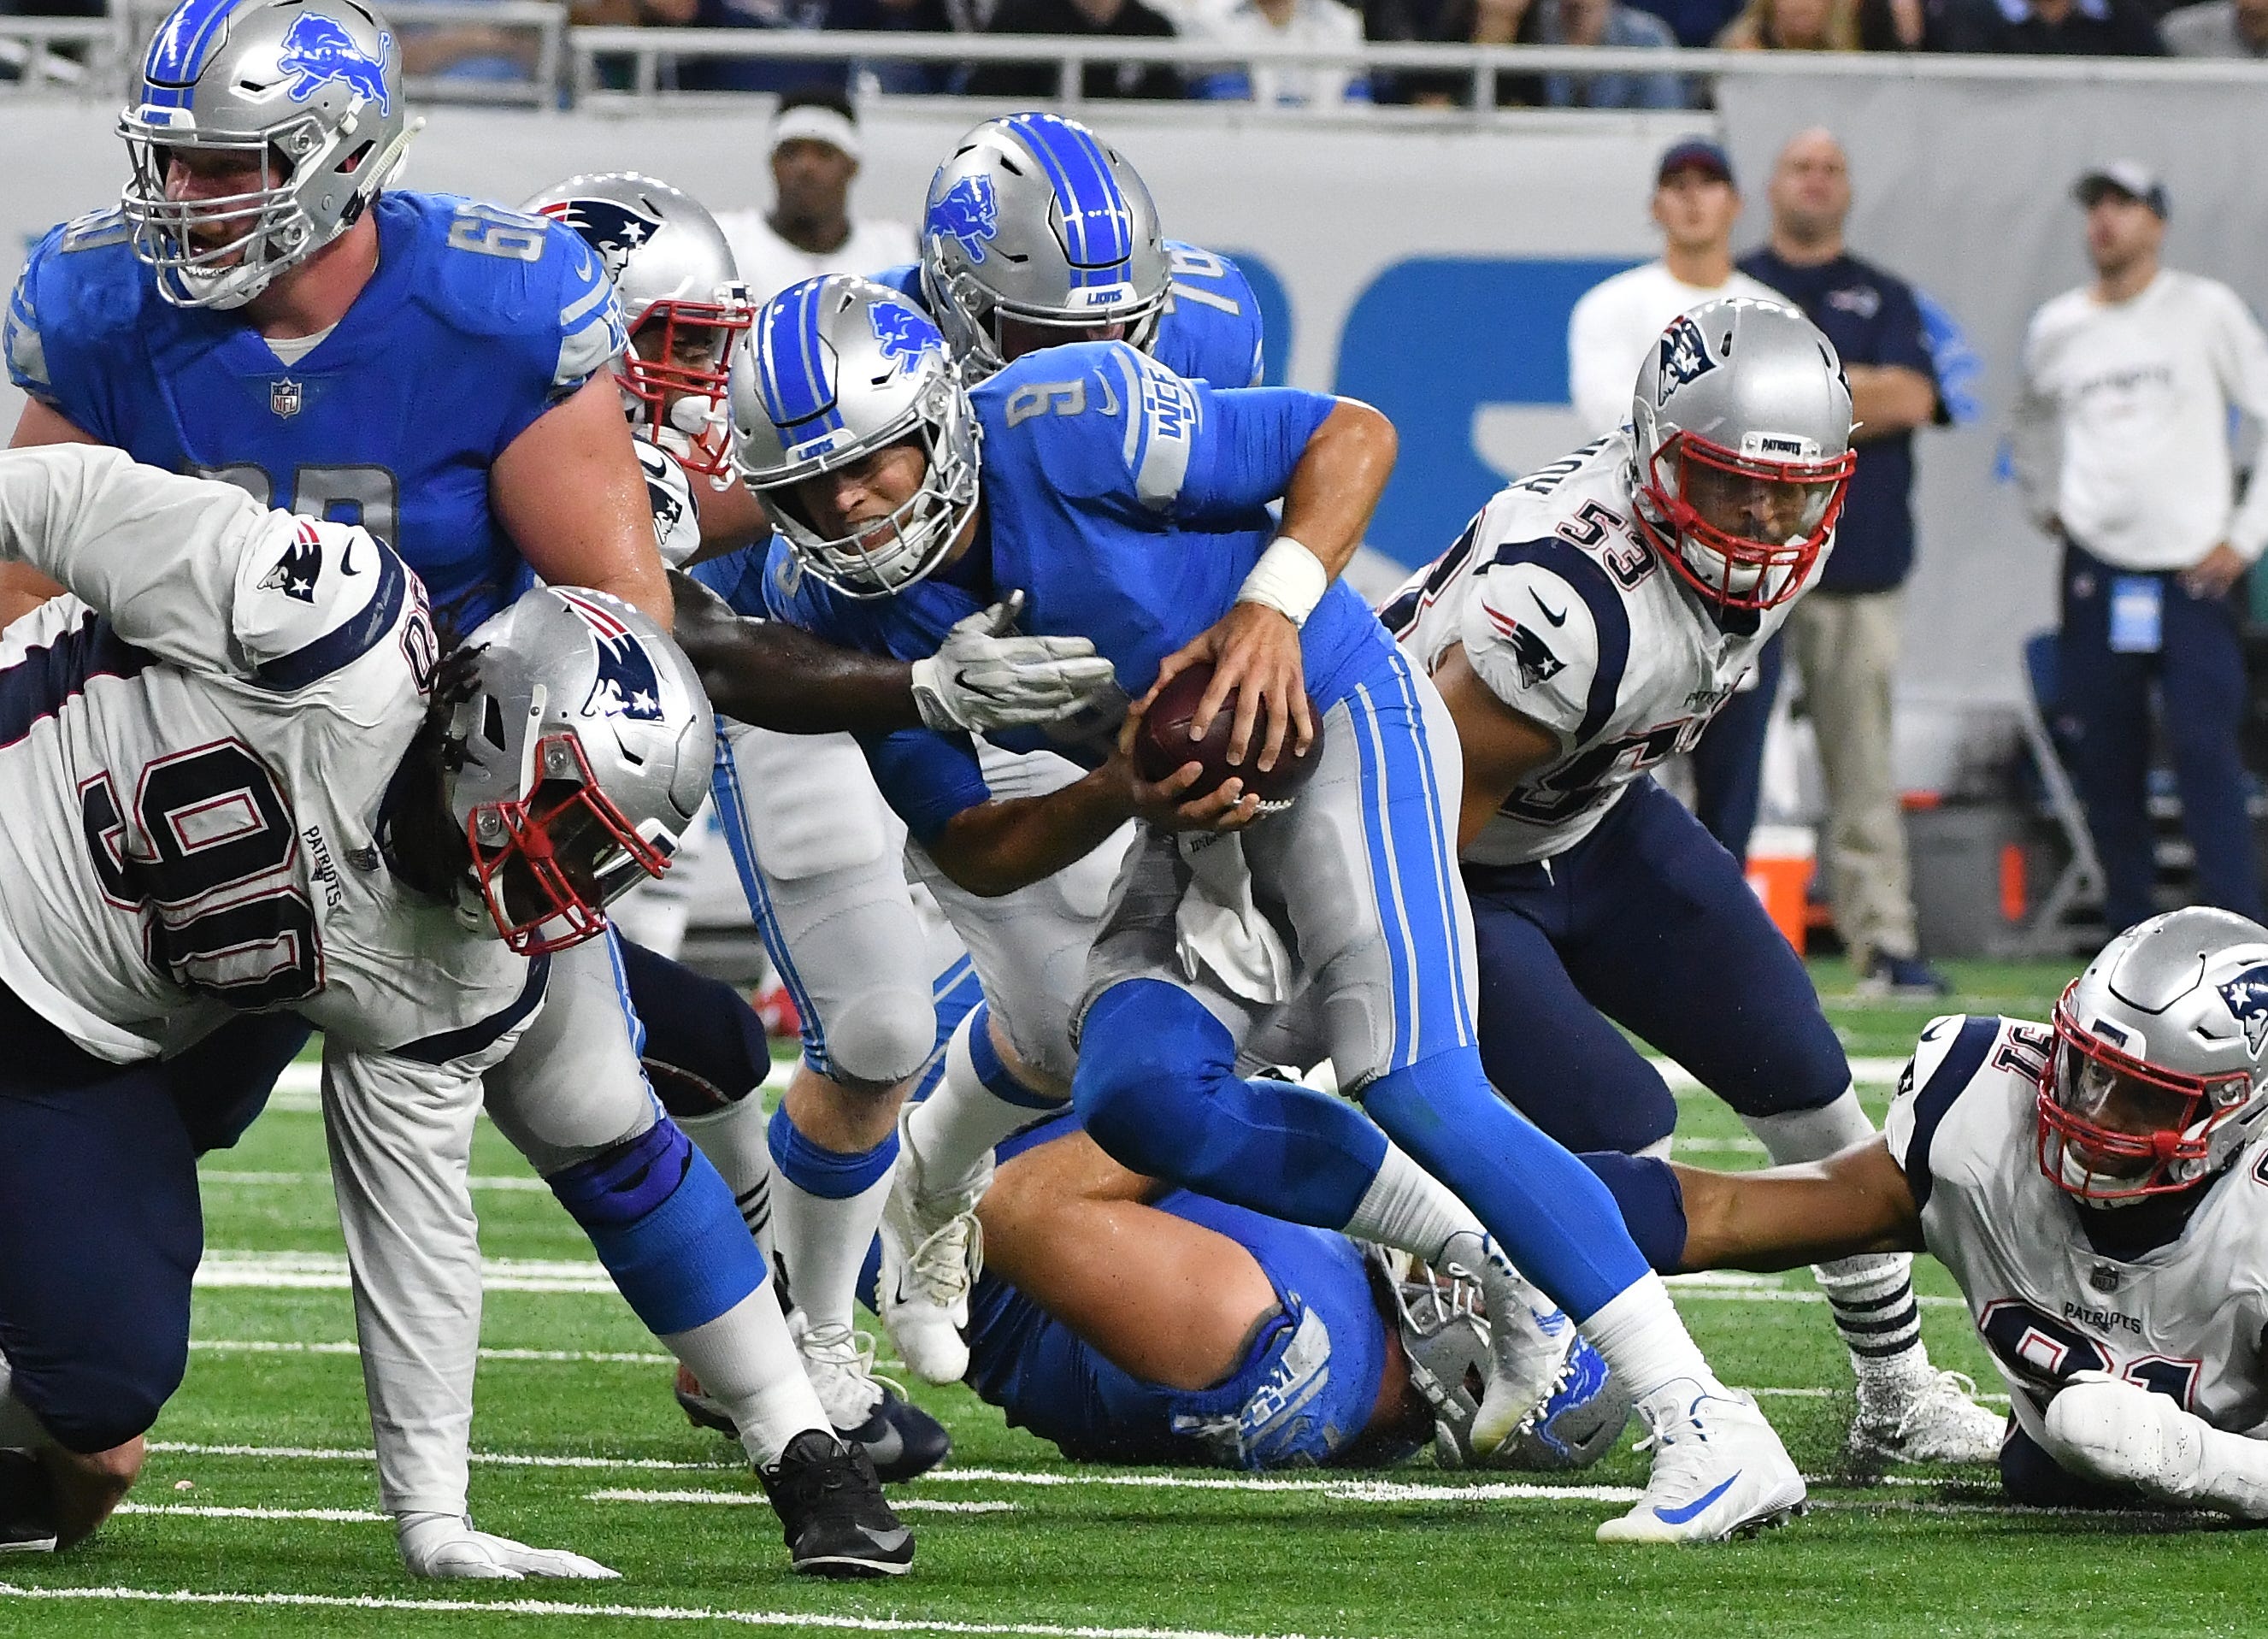 Lions quarterback Matthew Stafford scrambles out of pressure and throws a completion in the second quarter.